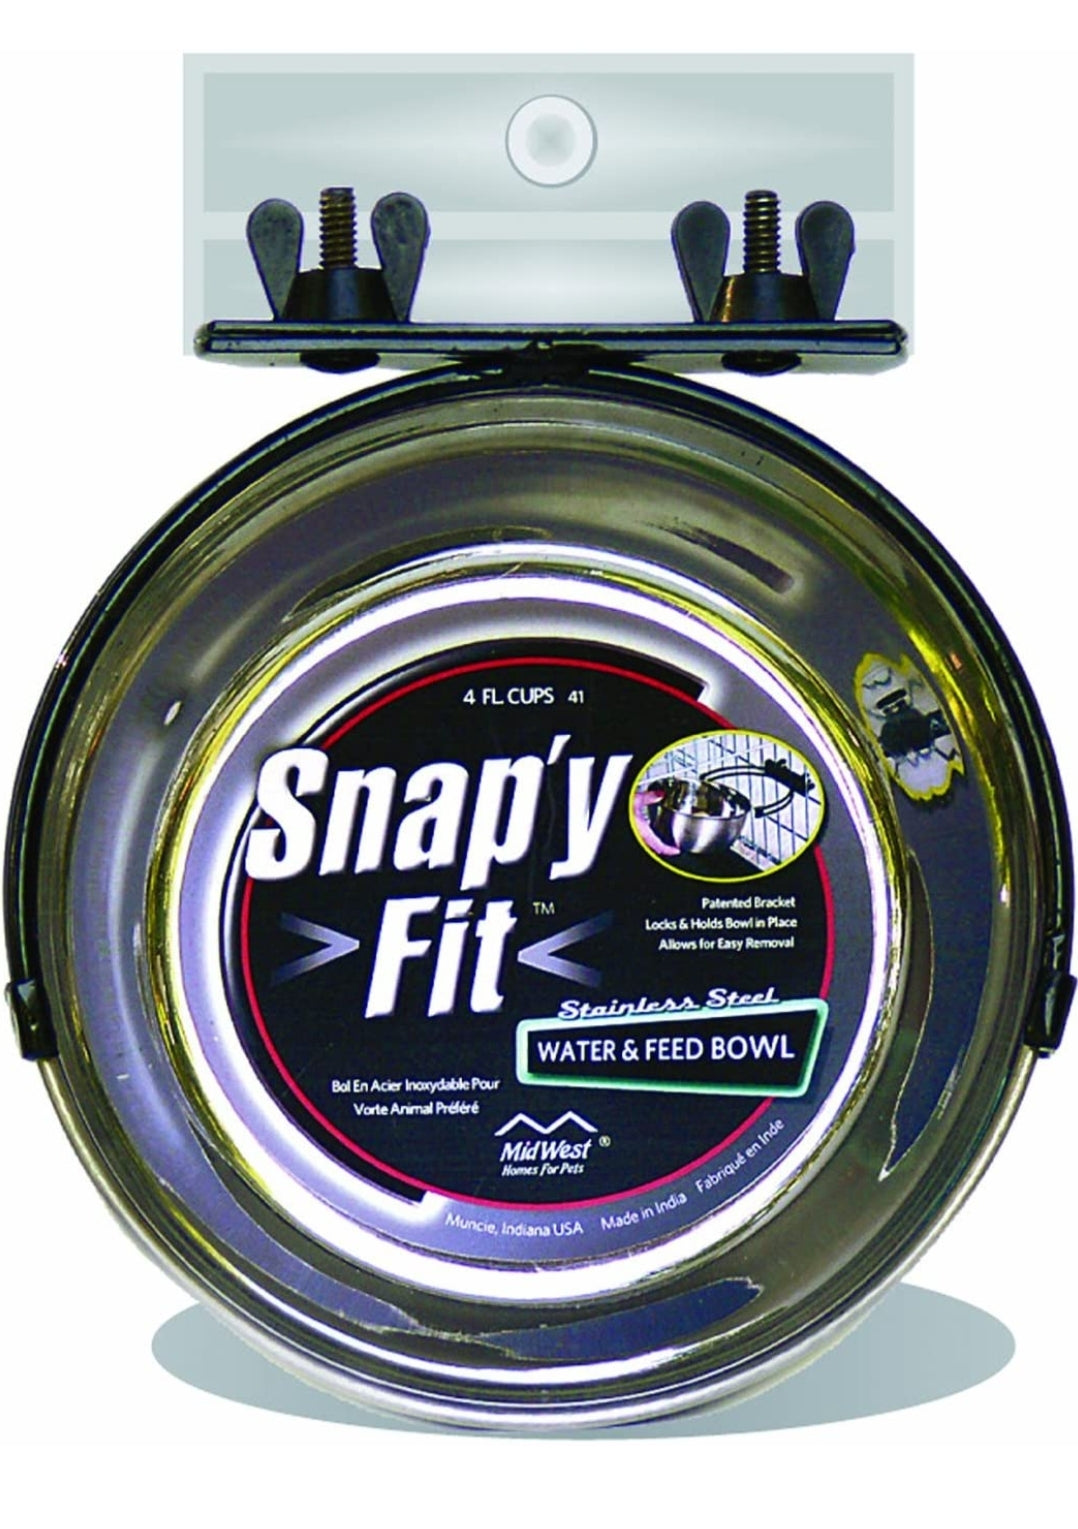 Midwest Homes for Pets Snap'y Fit - 1 Quart